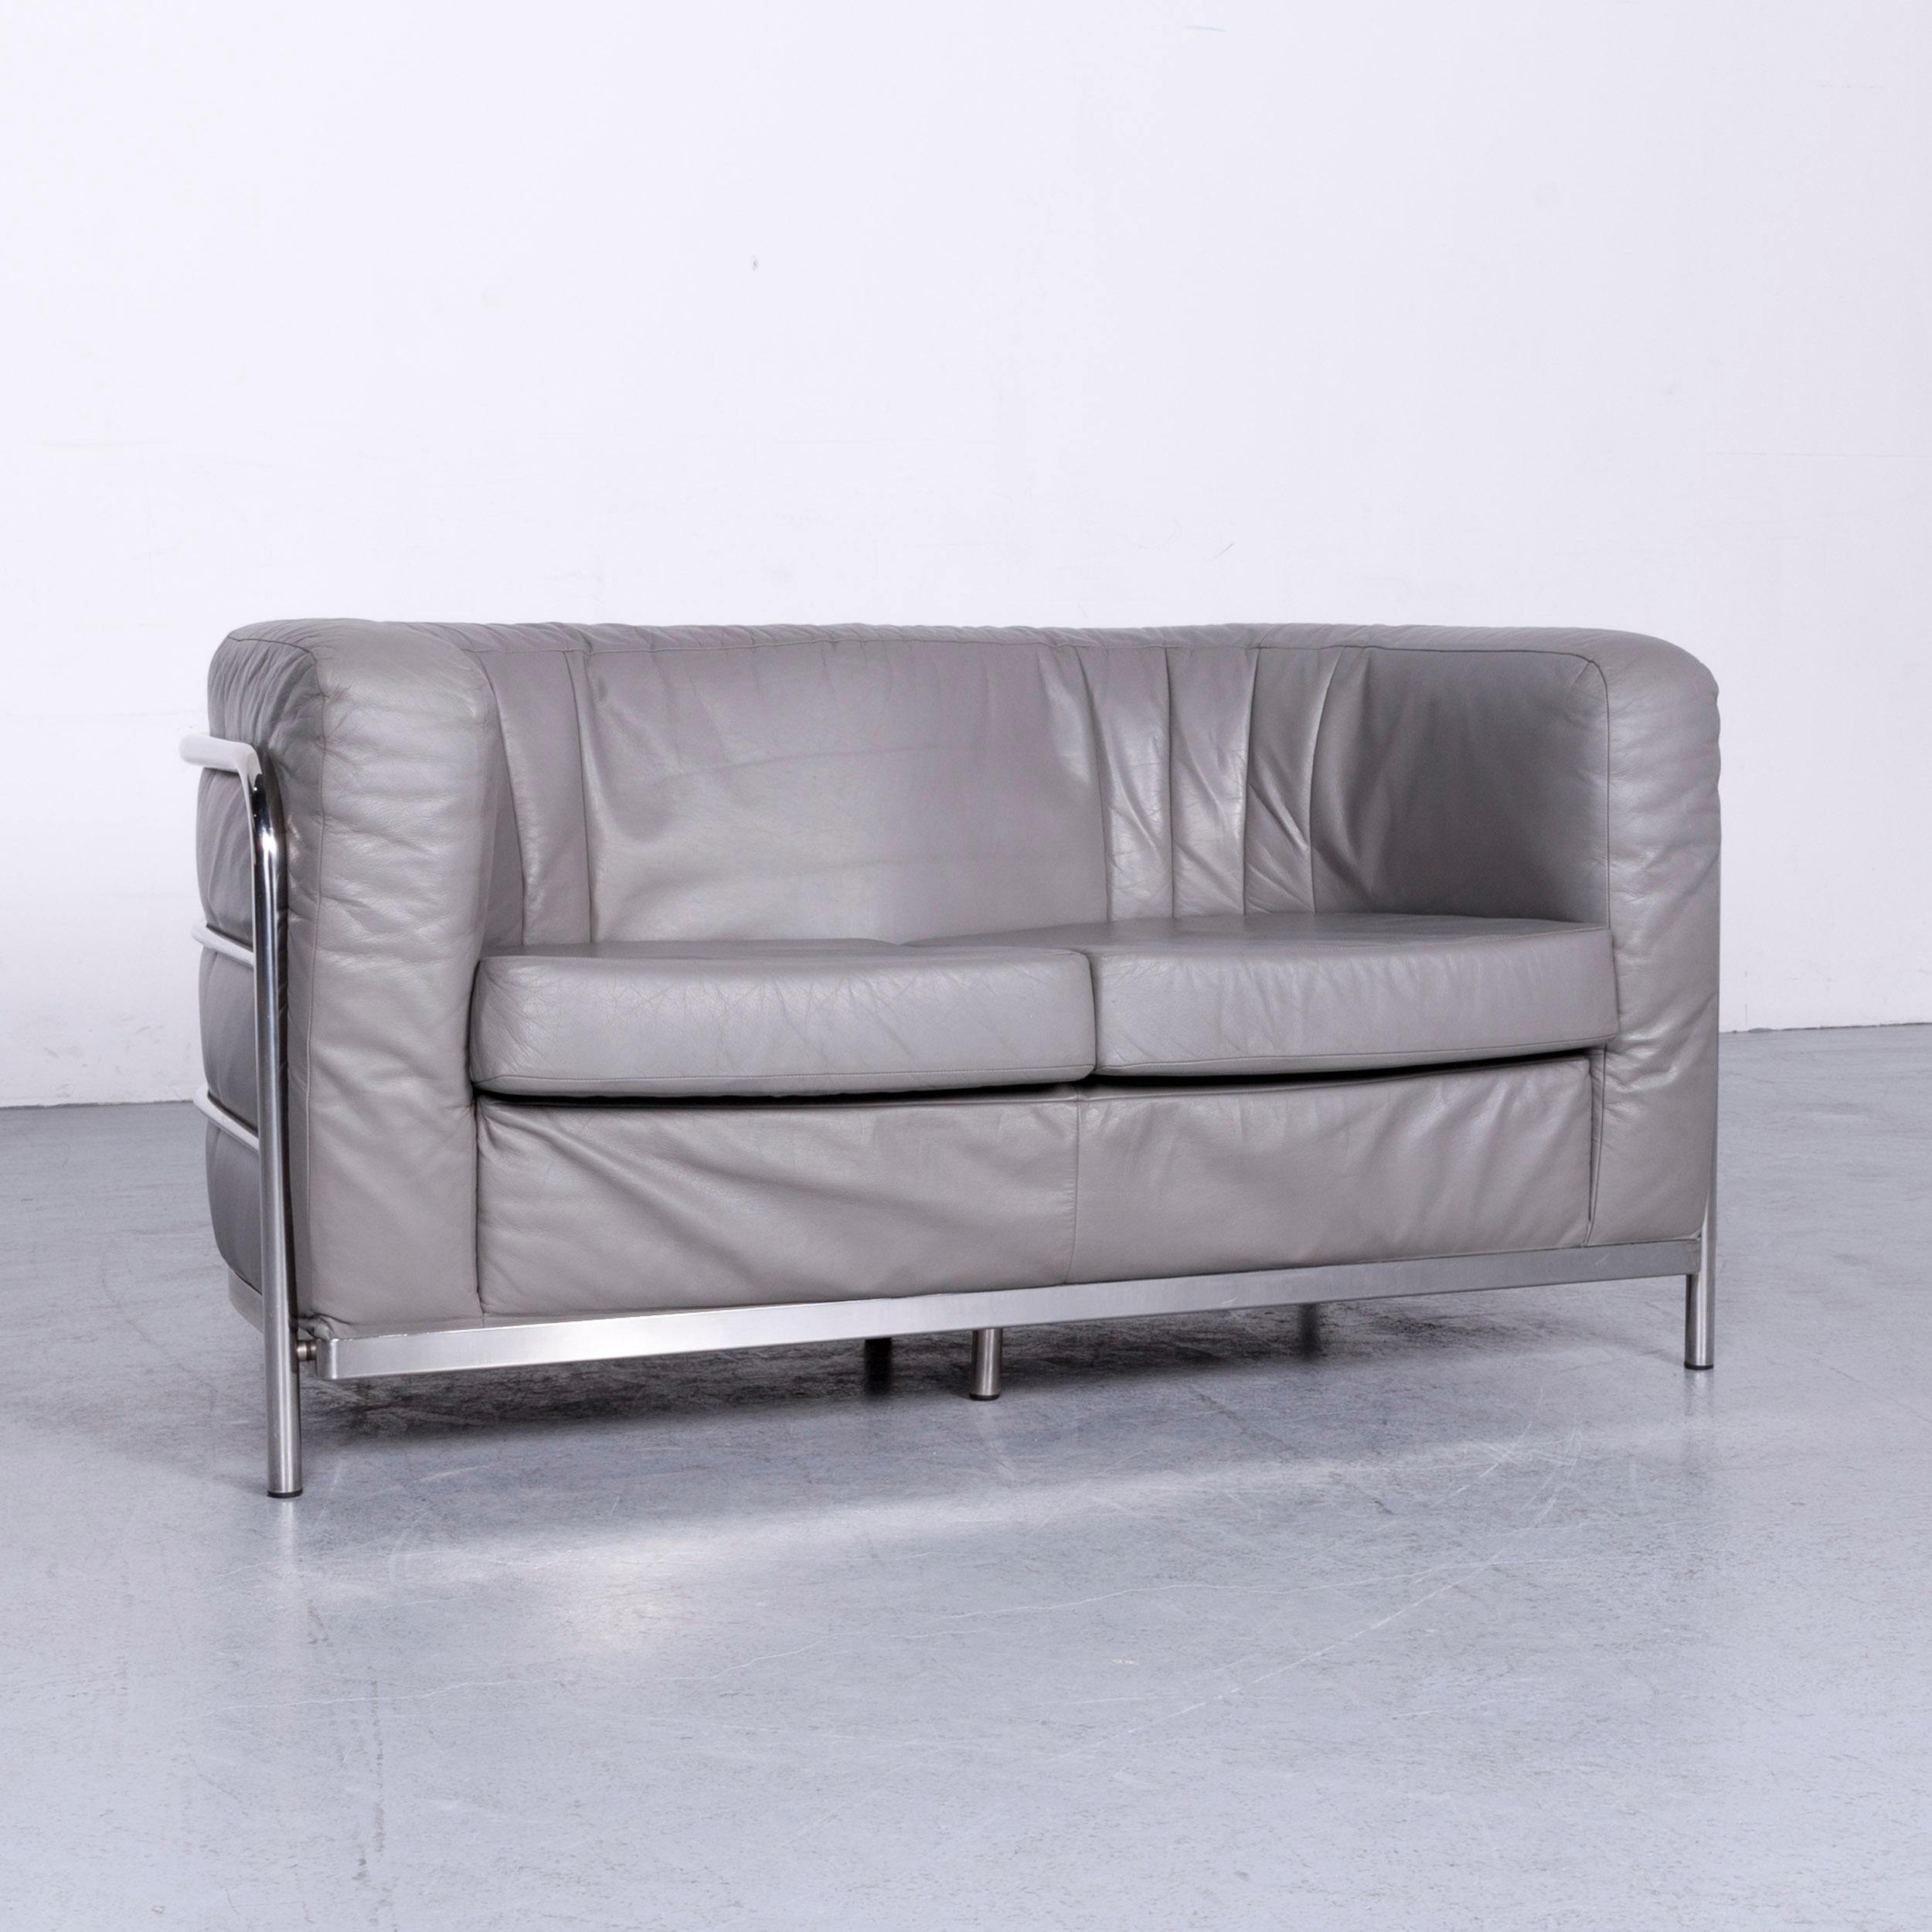 We bring to you a Zanotta Onda designer sofa leather grey two-seat couch.



















 